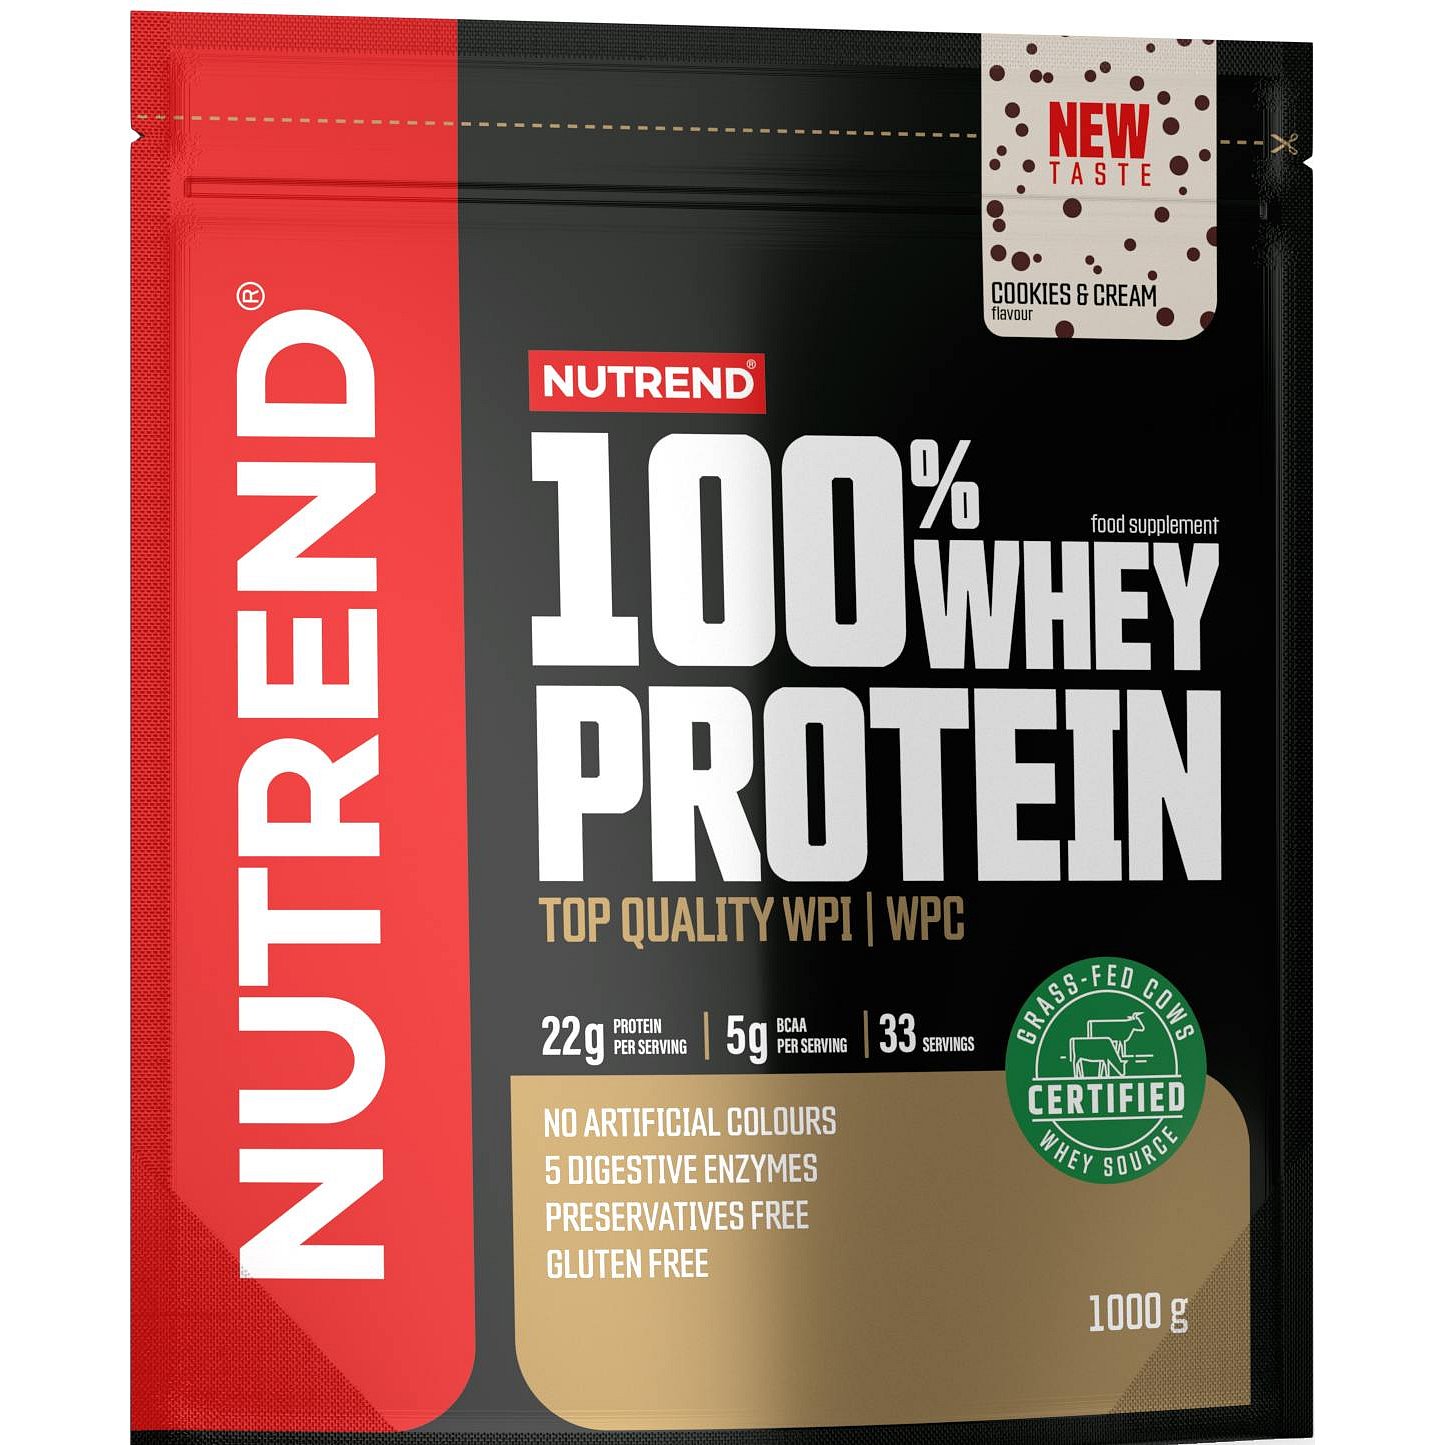 Nutrend 100% Whey Protein cookies cream 1000g